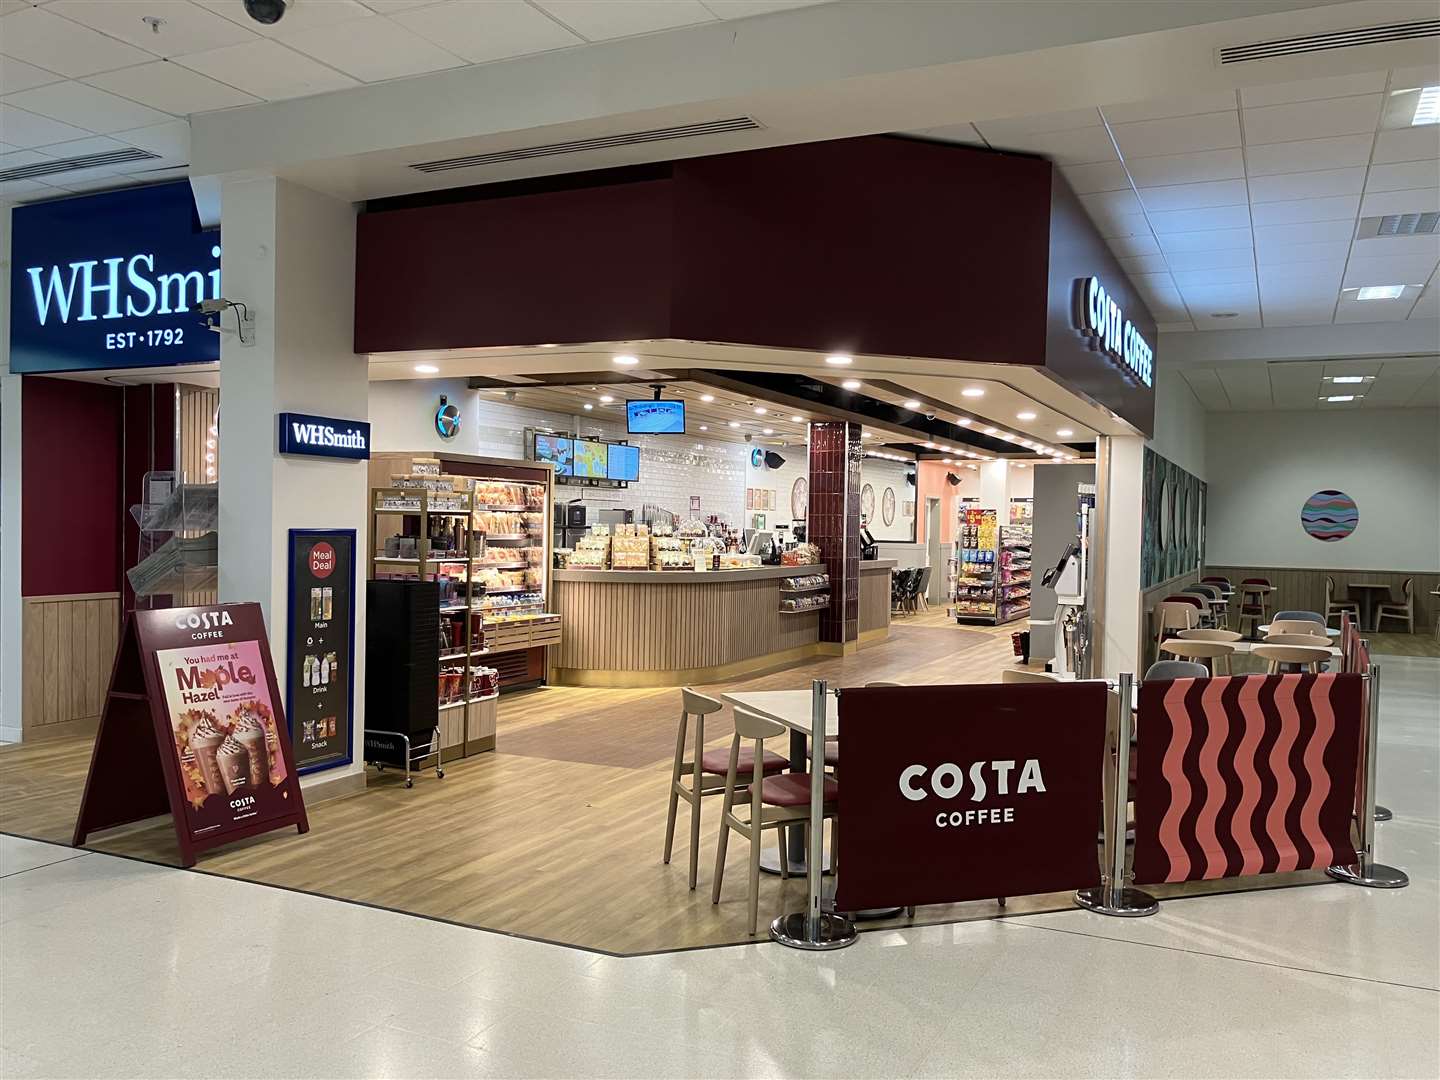 The new combined store at the airport